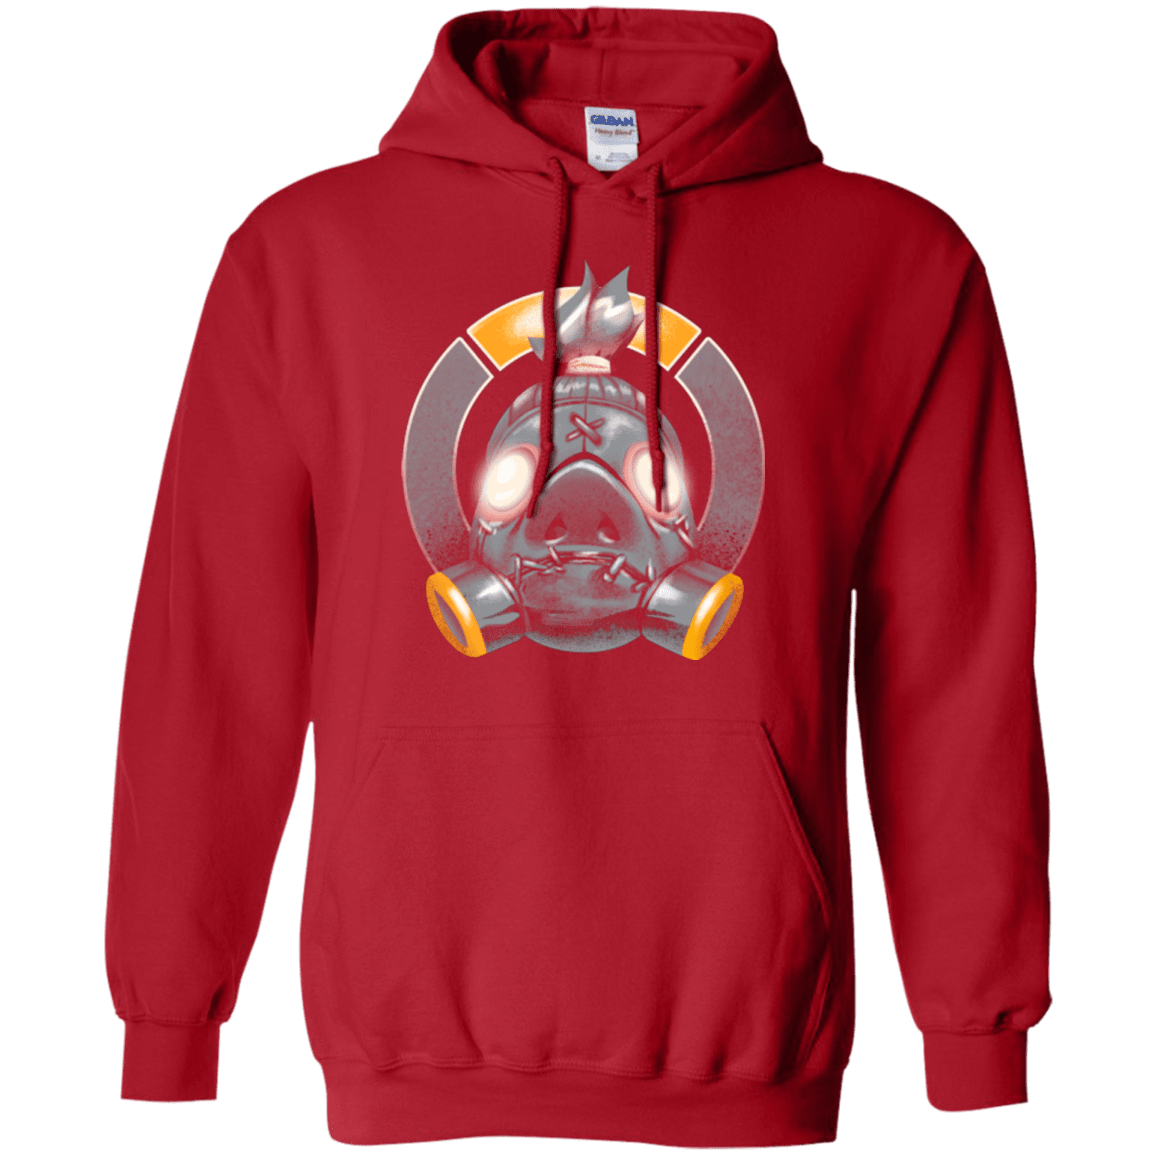 The Ruthless Killer Pullover Hoodie